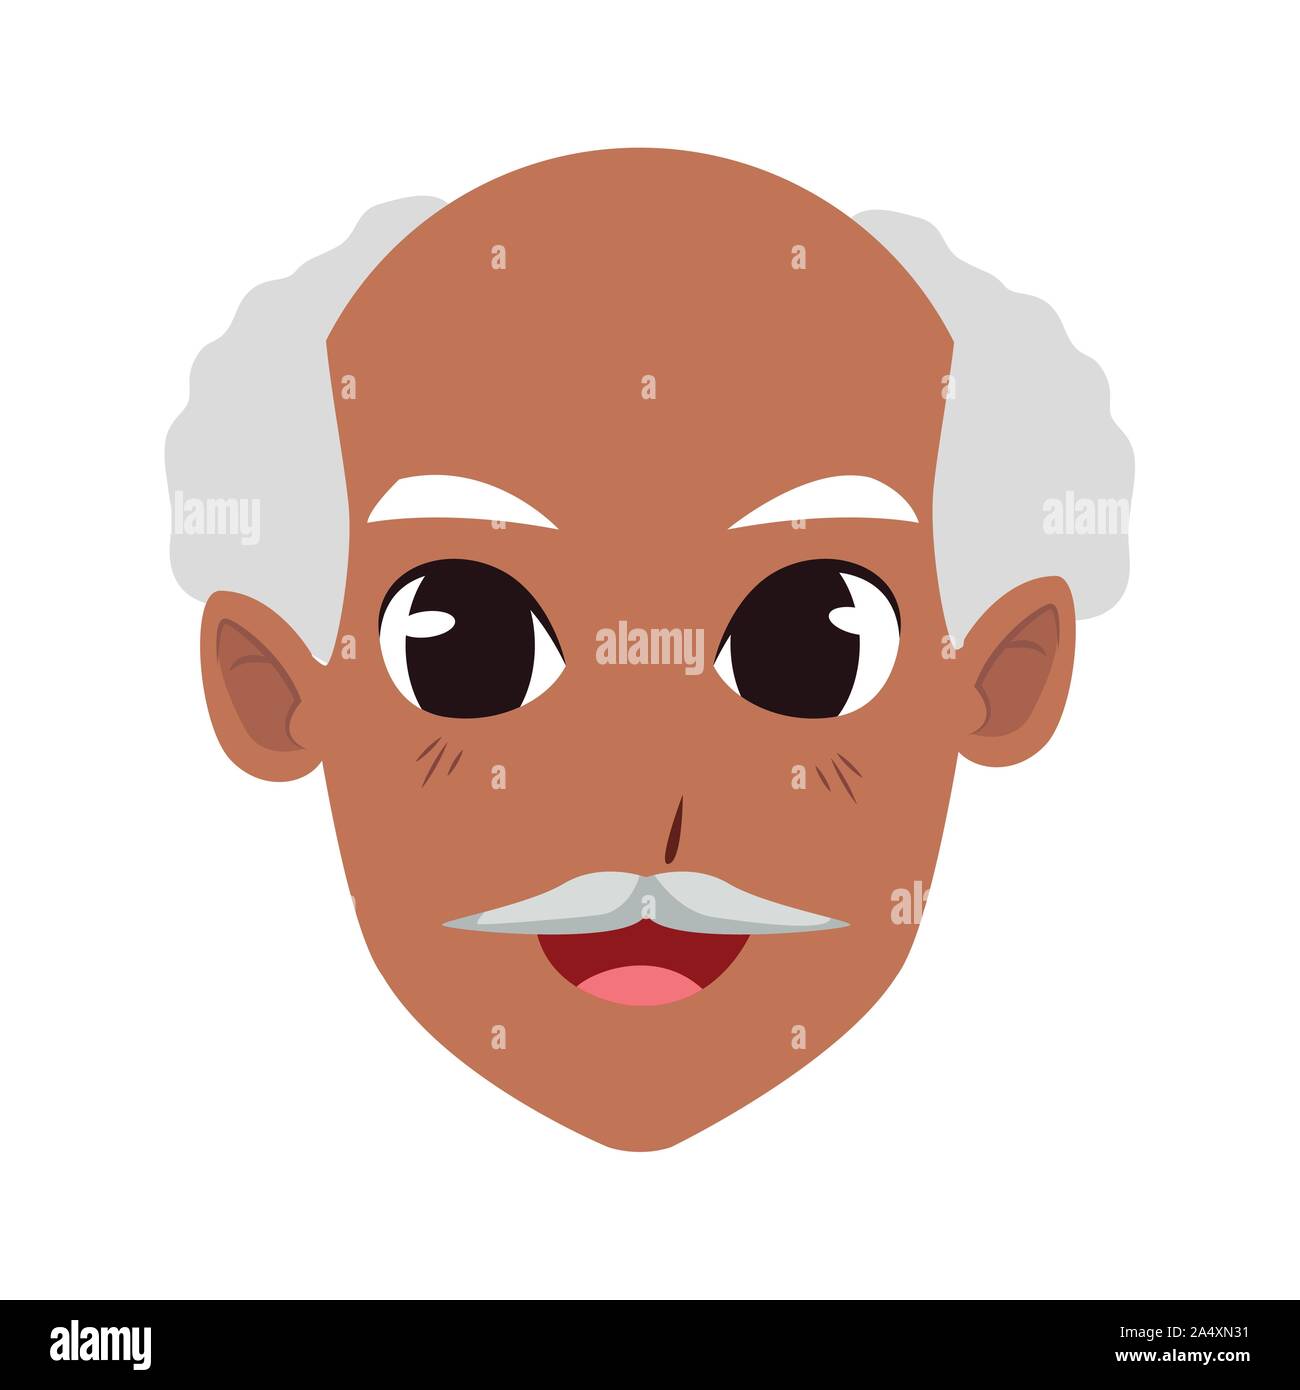 old man cartoon icon, colorful flat design Stock Vector